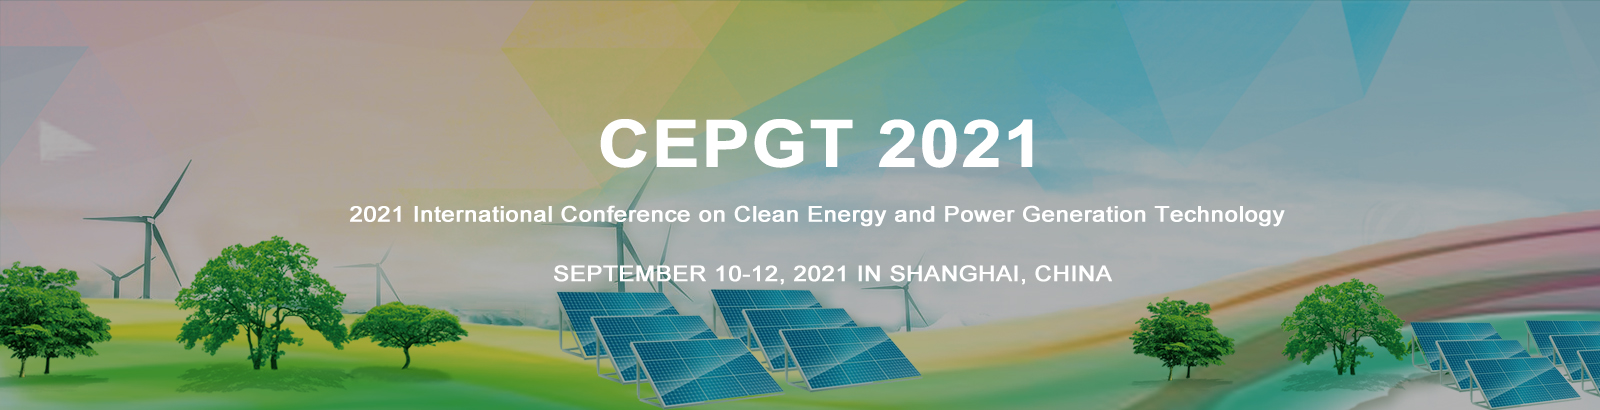 2021 6th International Conference on Clean Energy and Power Generation Technology (CEPGT 2021), Shanghai, China